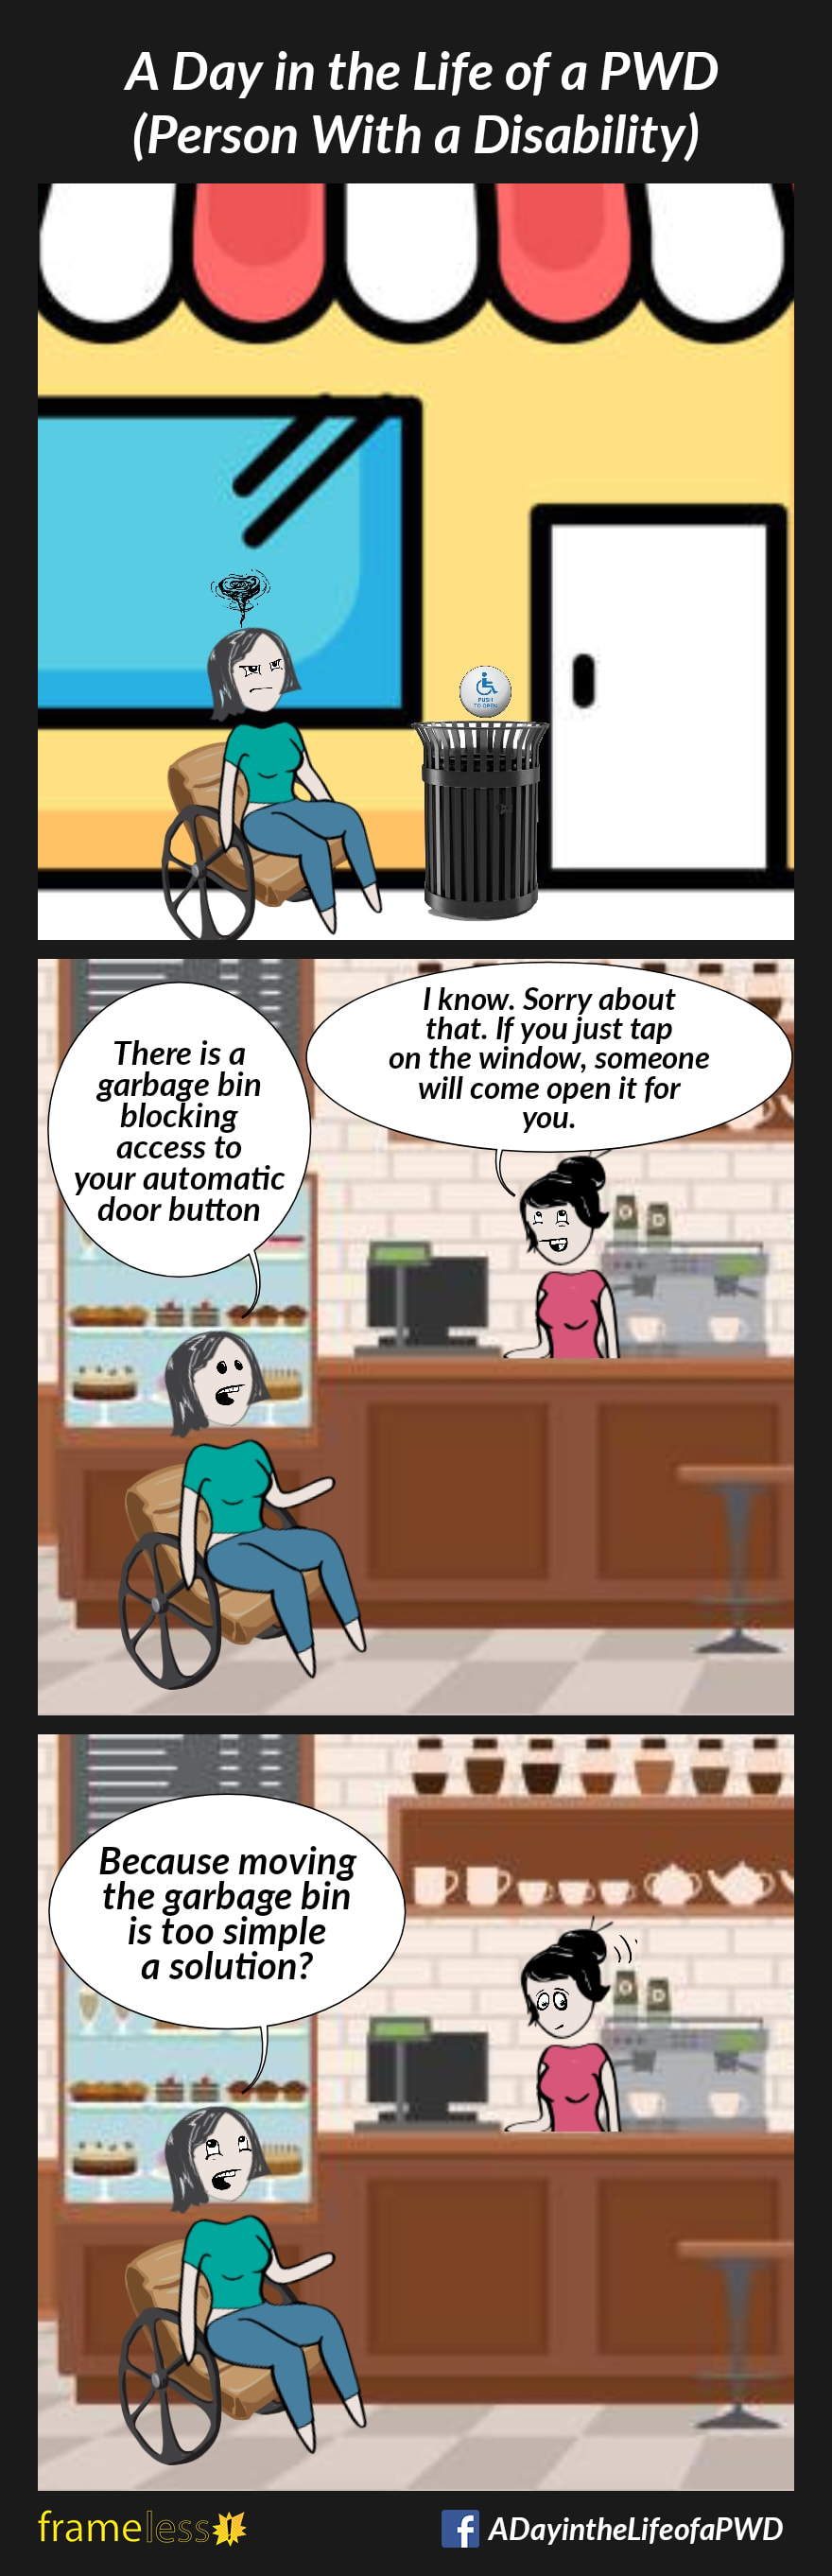 COMIC STRIP 
A Day in the Life of a PWD (Person With a Disability) 

Frame 1:
A woman in a wheelchair is unable to access the automatic door button to a shop because a garbage bin has been placed in front of it.

Frame 2:
Inside the shop, the woman speaks to an employee.
WOMAN: There is a garbage bin blocking access to your automatic door button.
EMPLOYEE: I know. Sorry about that. If you just tap on the window, someone will come open it for you.

Frame 3:
WOMAN (rolling her eyes): Because moving the garbage bin is too simple a solution?